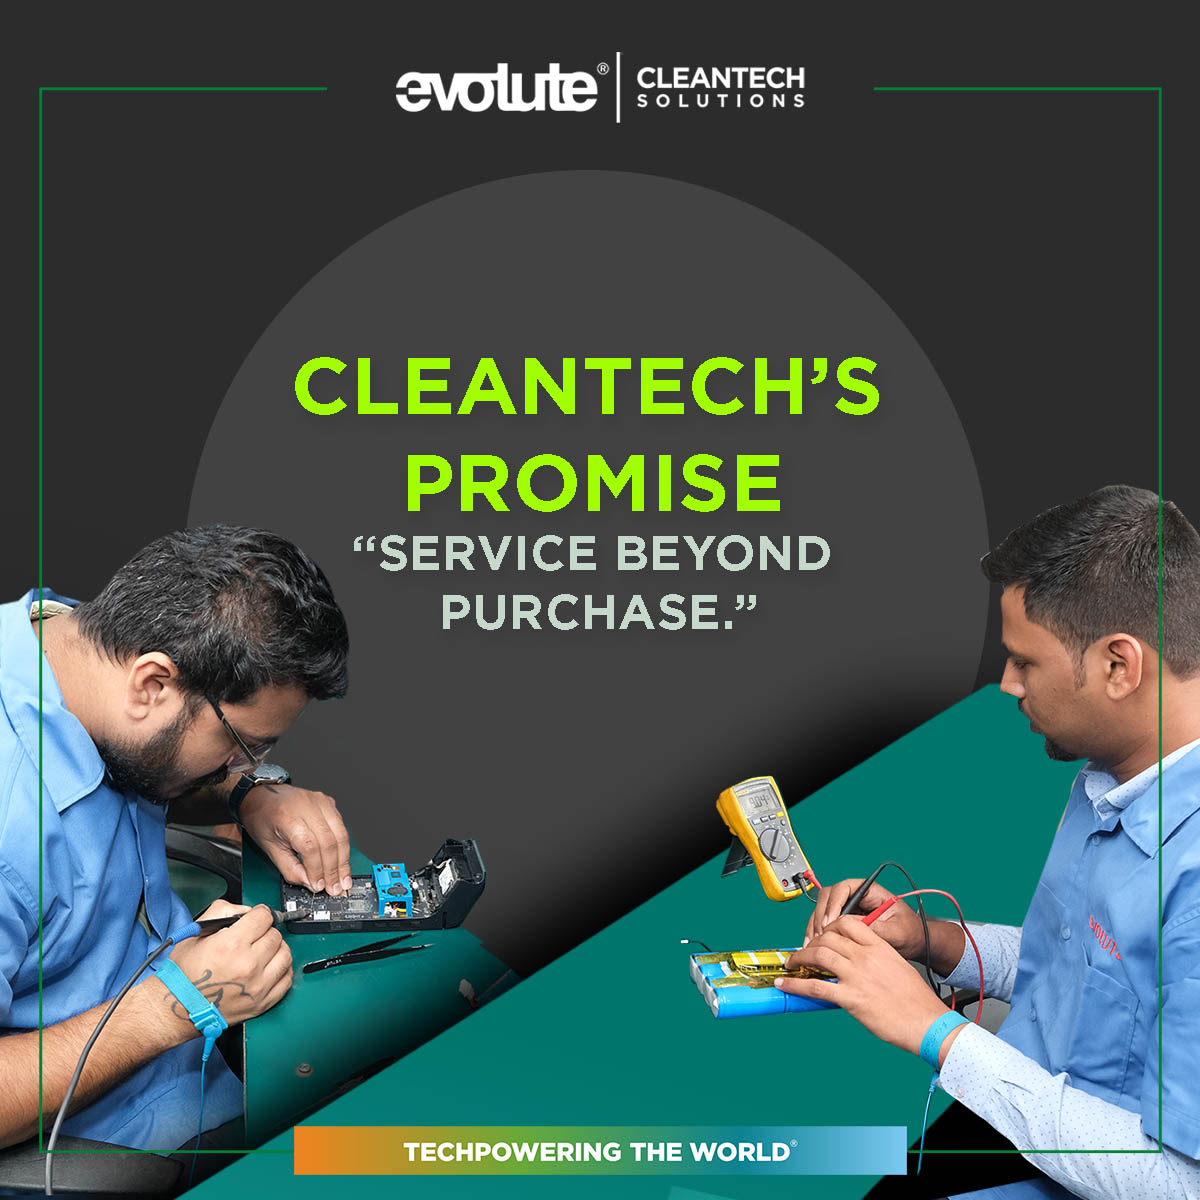 CleanTech's Exemplary Impact: Sustainable Solutions & Support
.
.
Visit us at: evolute.in
.
.
#Cleantech #Cleantechsolutions #Evolute #Evolutegroup #Service #Repair #EMSExpertise #ReliableSolutions #AlliedServices #QualityAssurance #Greenerfuture #Seamless